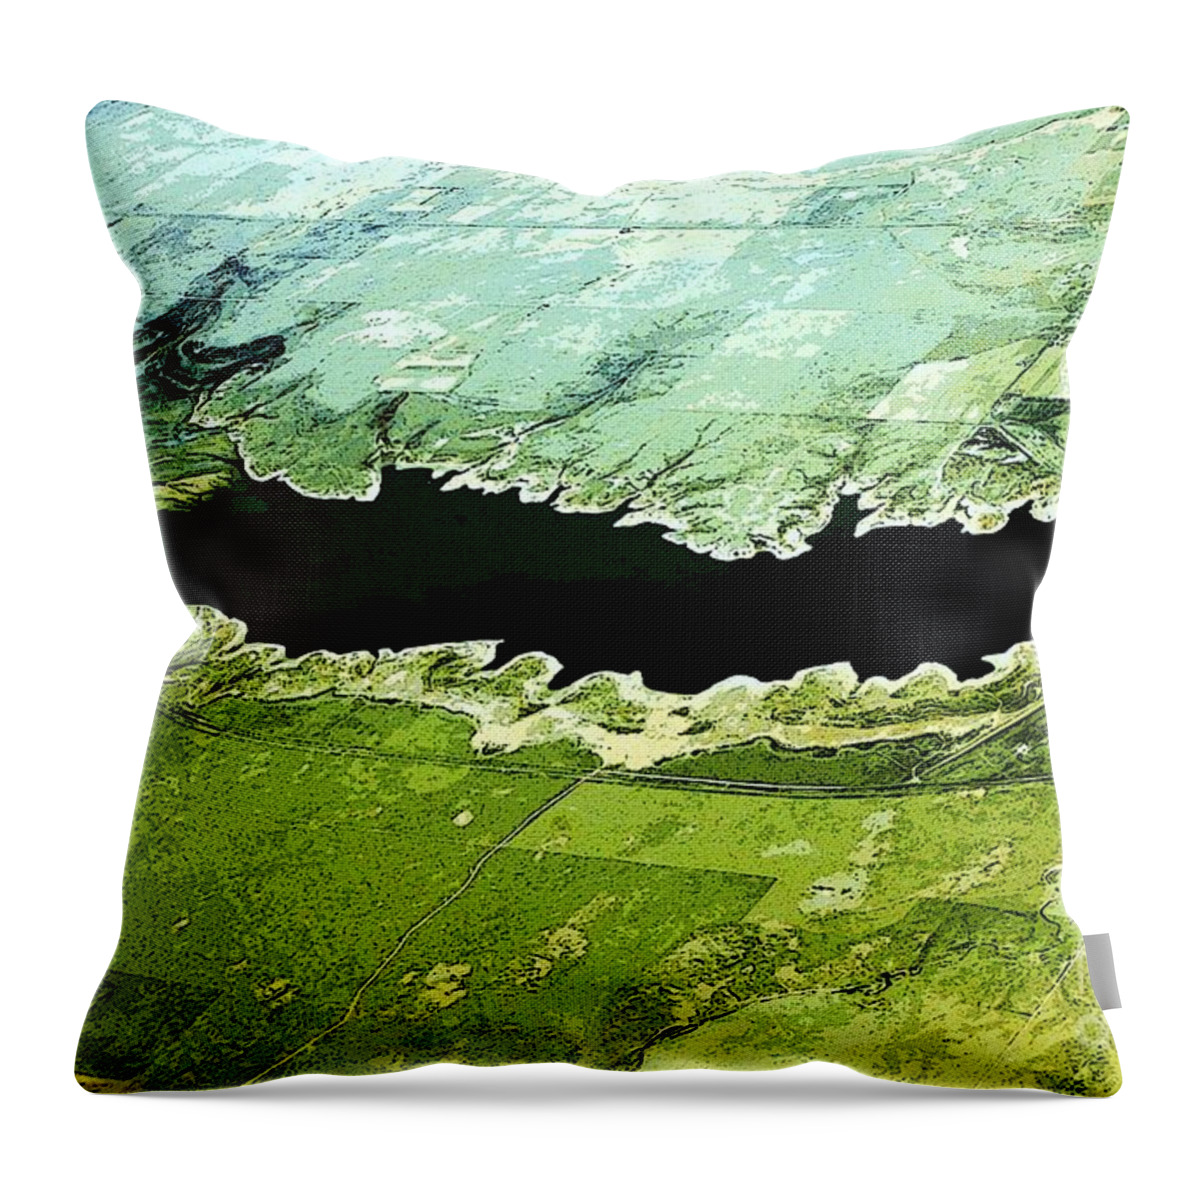 Aerial Throw Pillow featuring the photograph Over A Kansas Lake by Kathleen Struckle